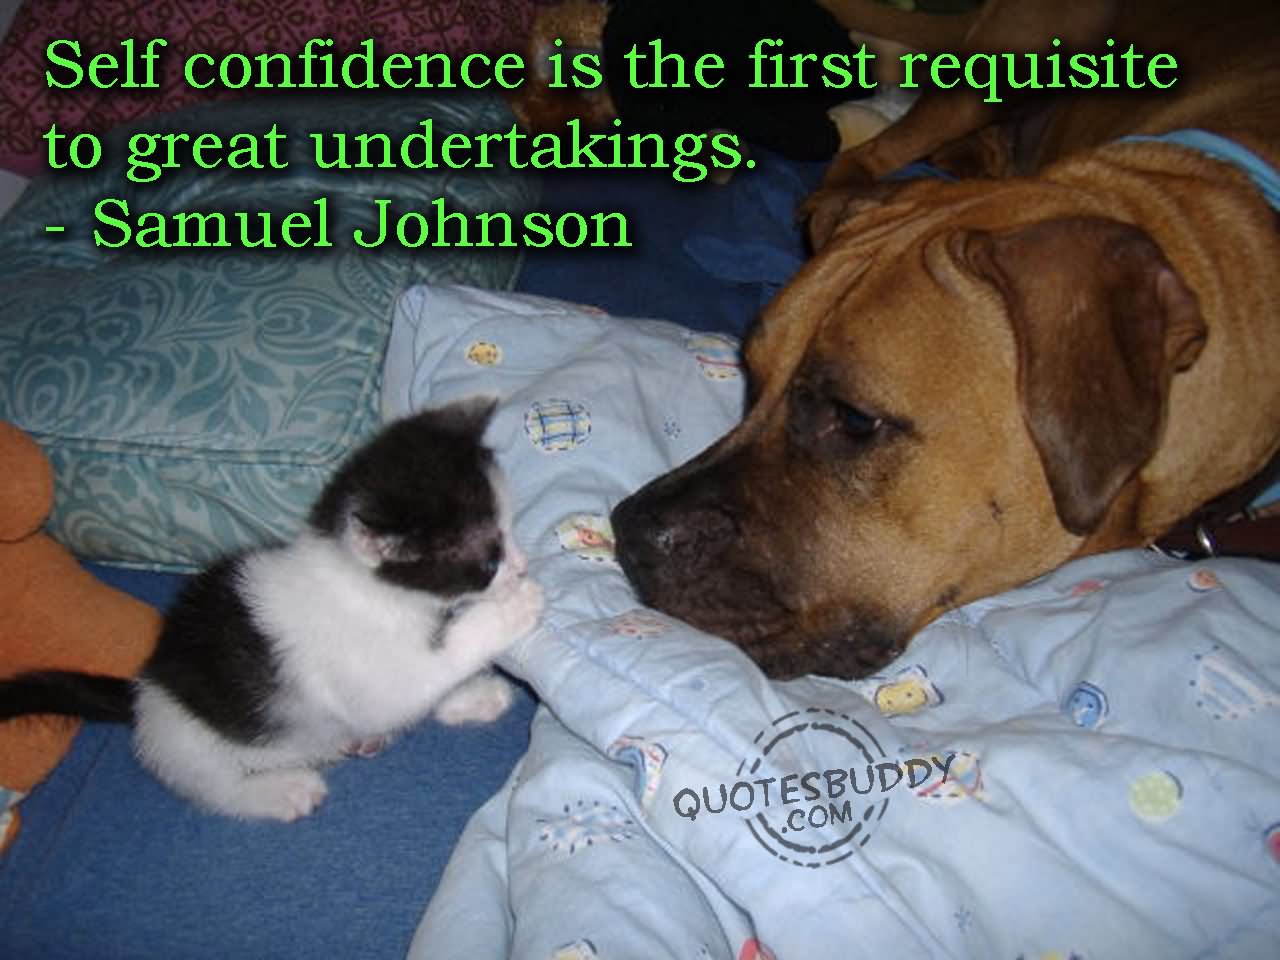 Self-confidence is the first requisite to great undertakings.